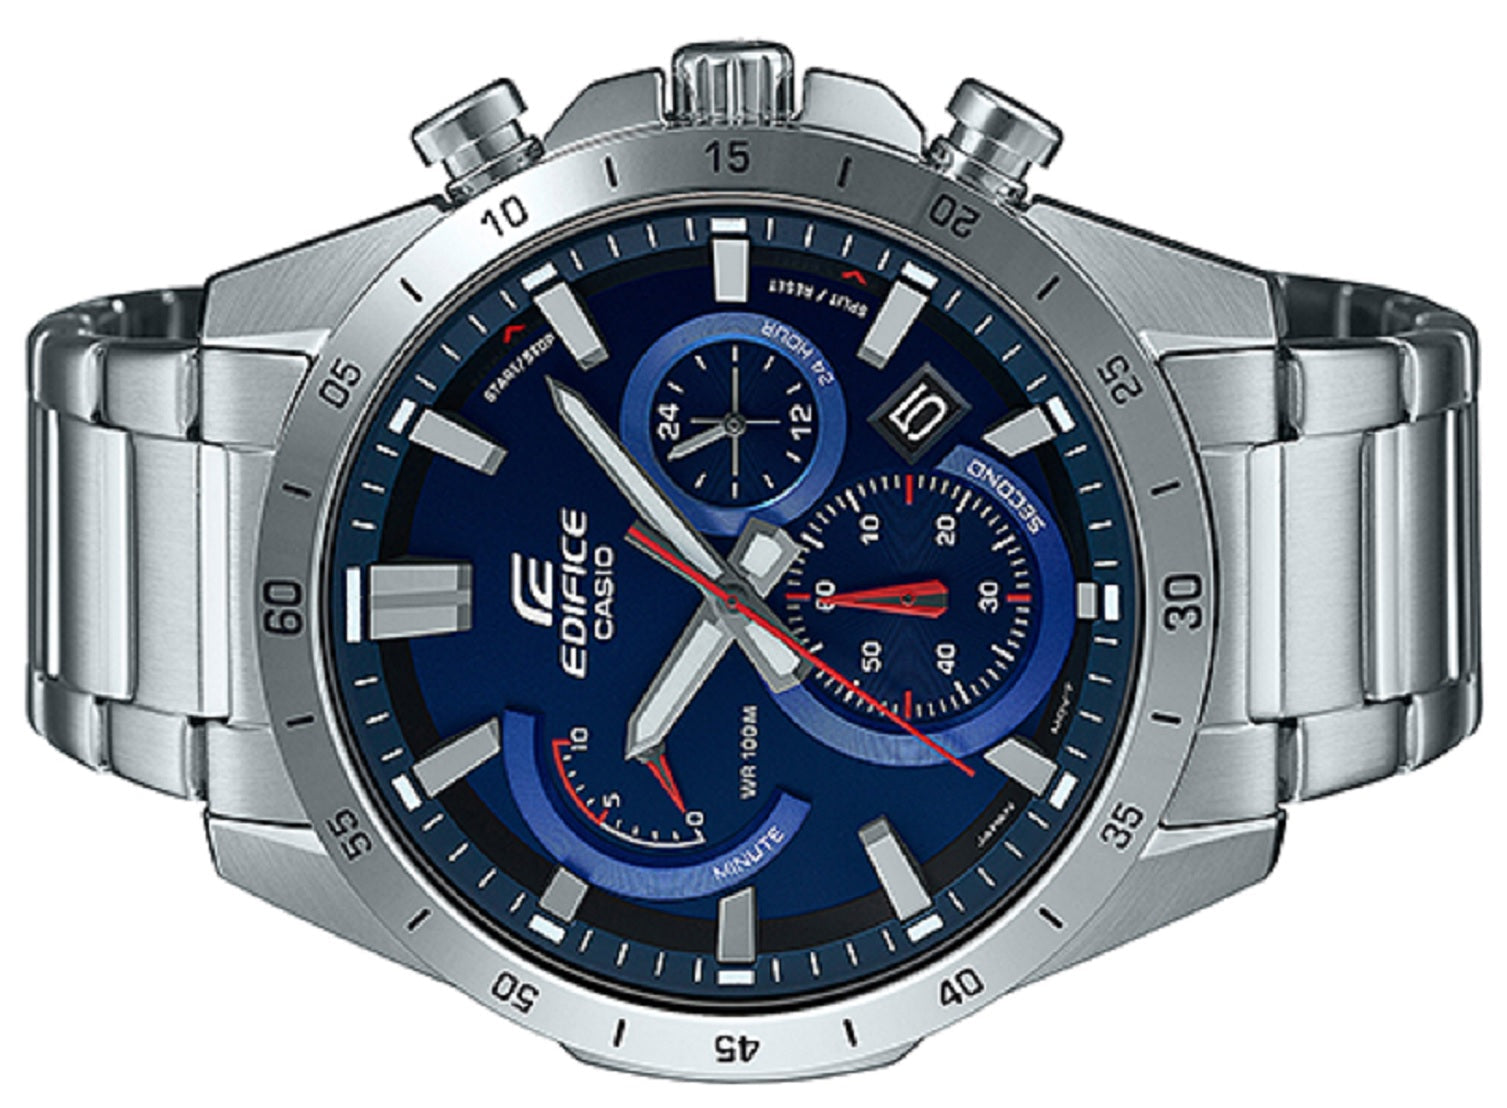 Casio Edifice EFR-573D-2A Chronograph Stainless Steel Strap Watch For Men-Watch Portal Philippines